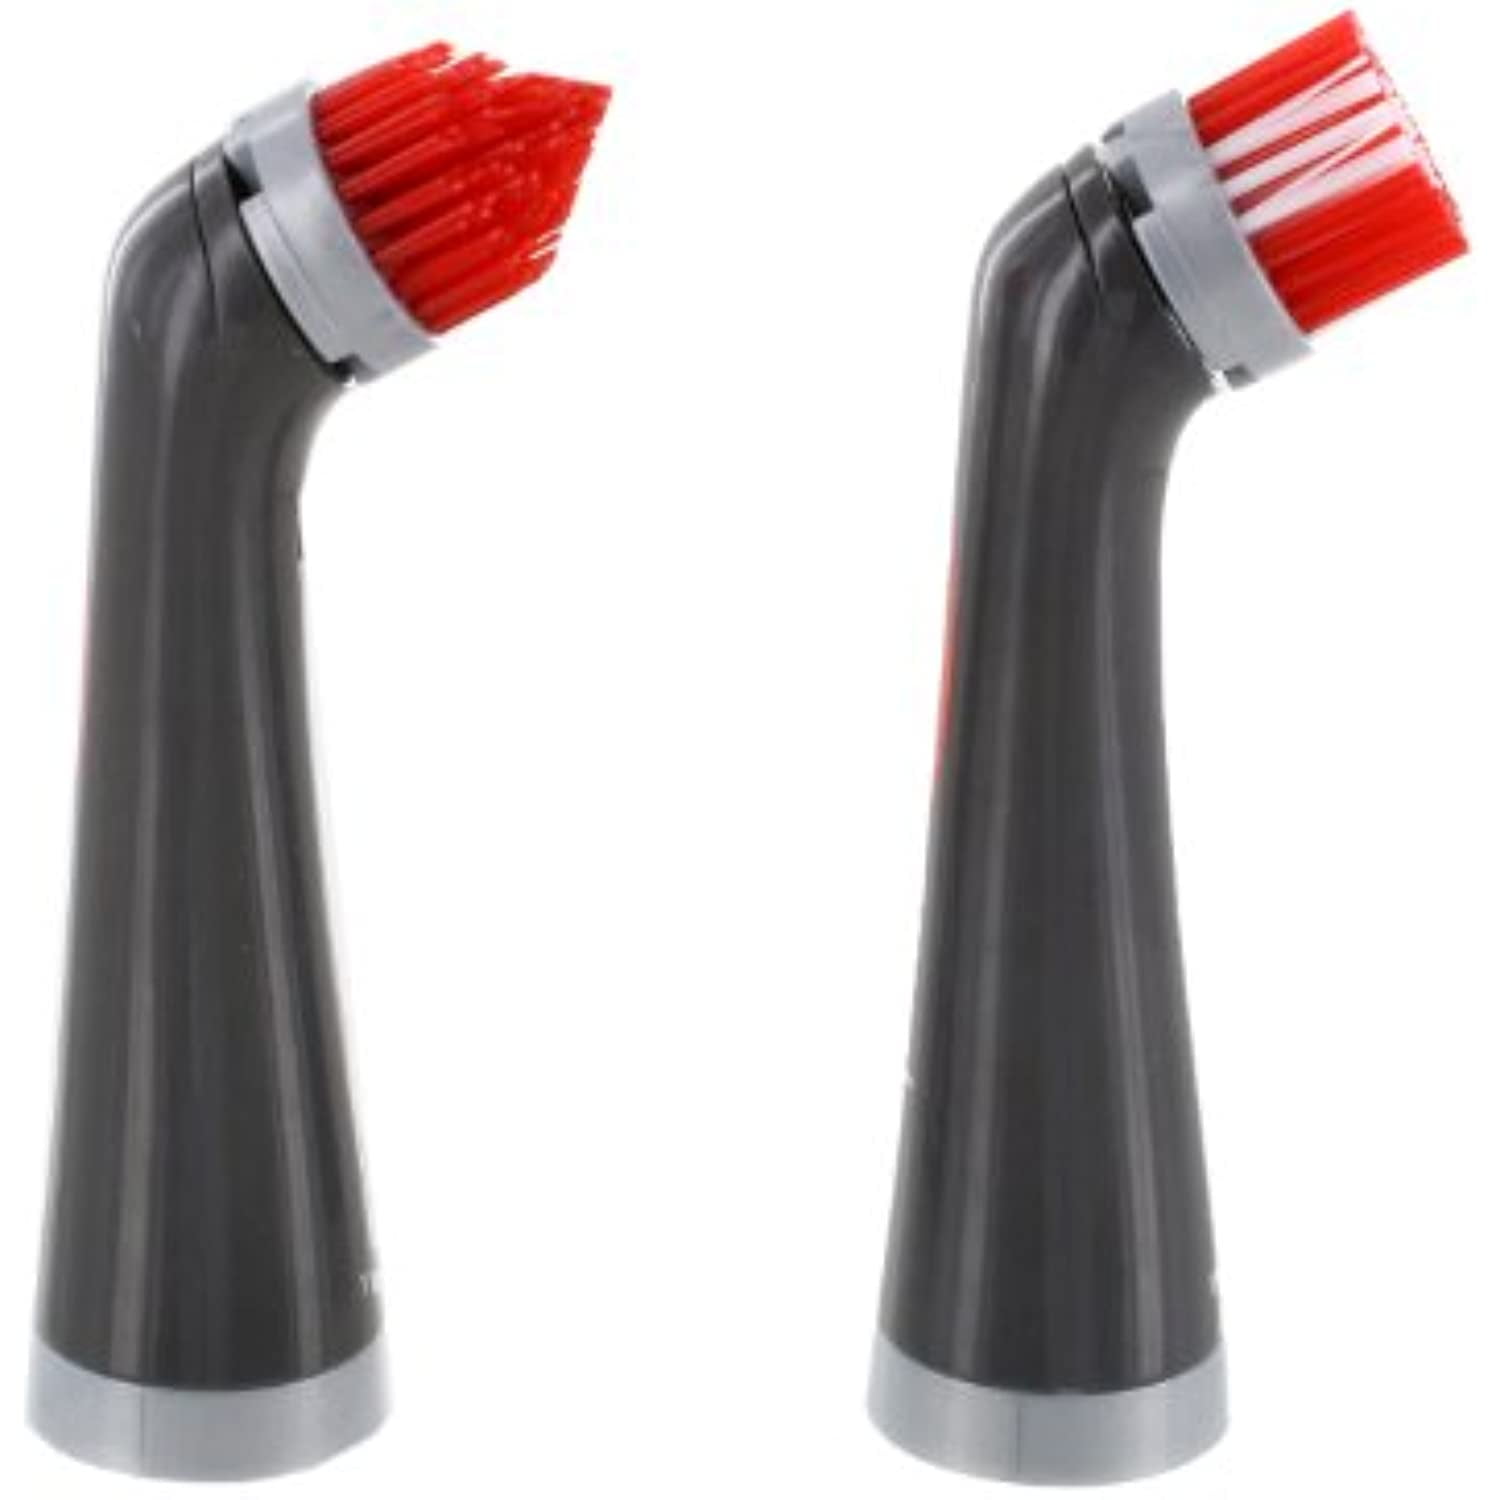 Rubbermaid Reveal Power Scrubber and Grout Head for Household Cleaning,  Gray/Red, Multi-Purpose Scrub Brush Cleaner for Grout/Tile/Bathroo